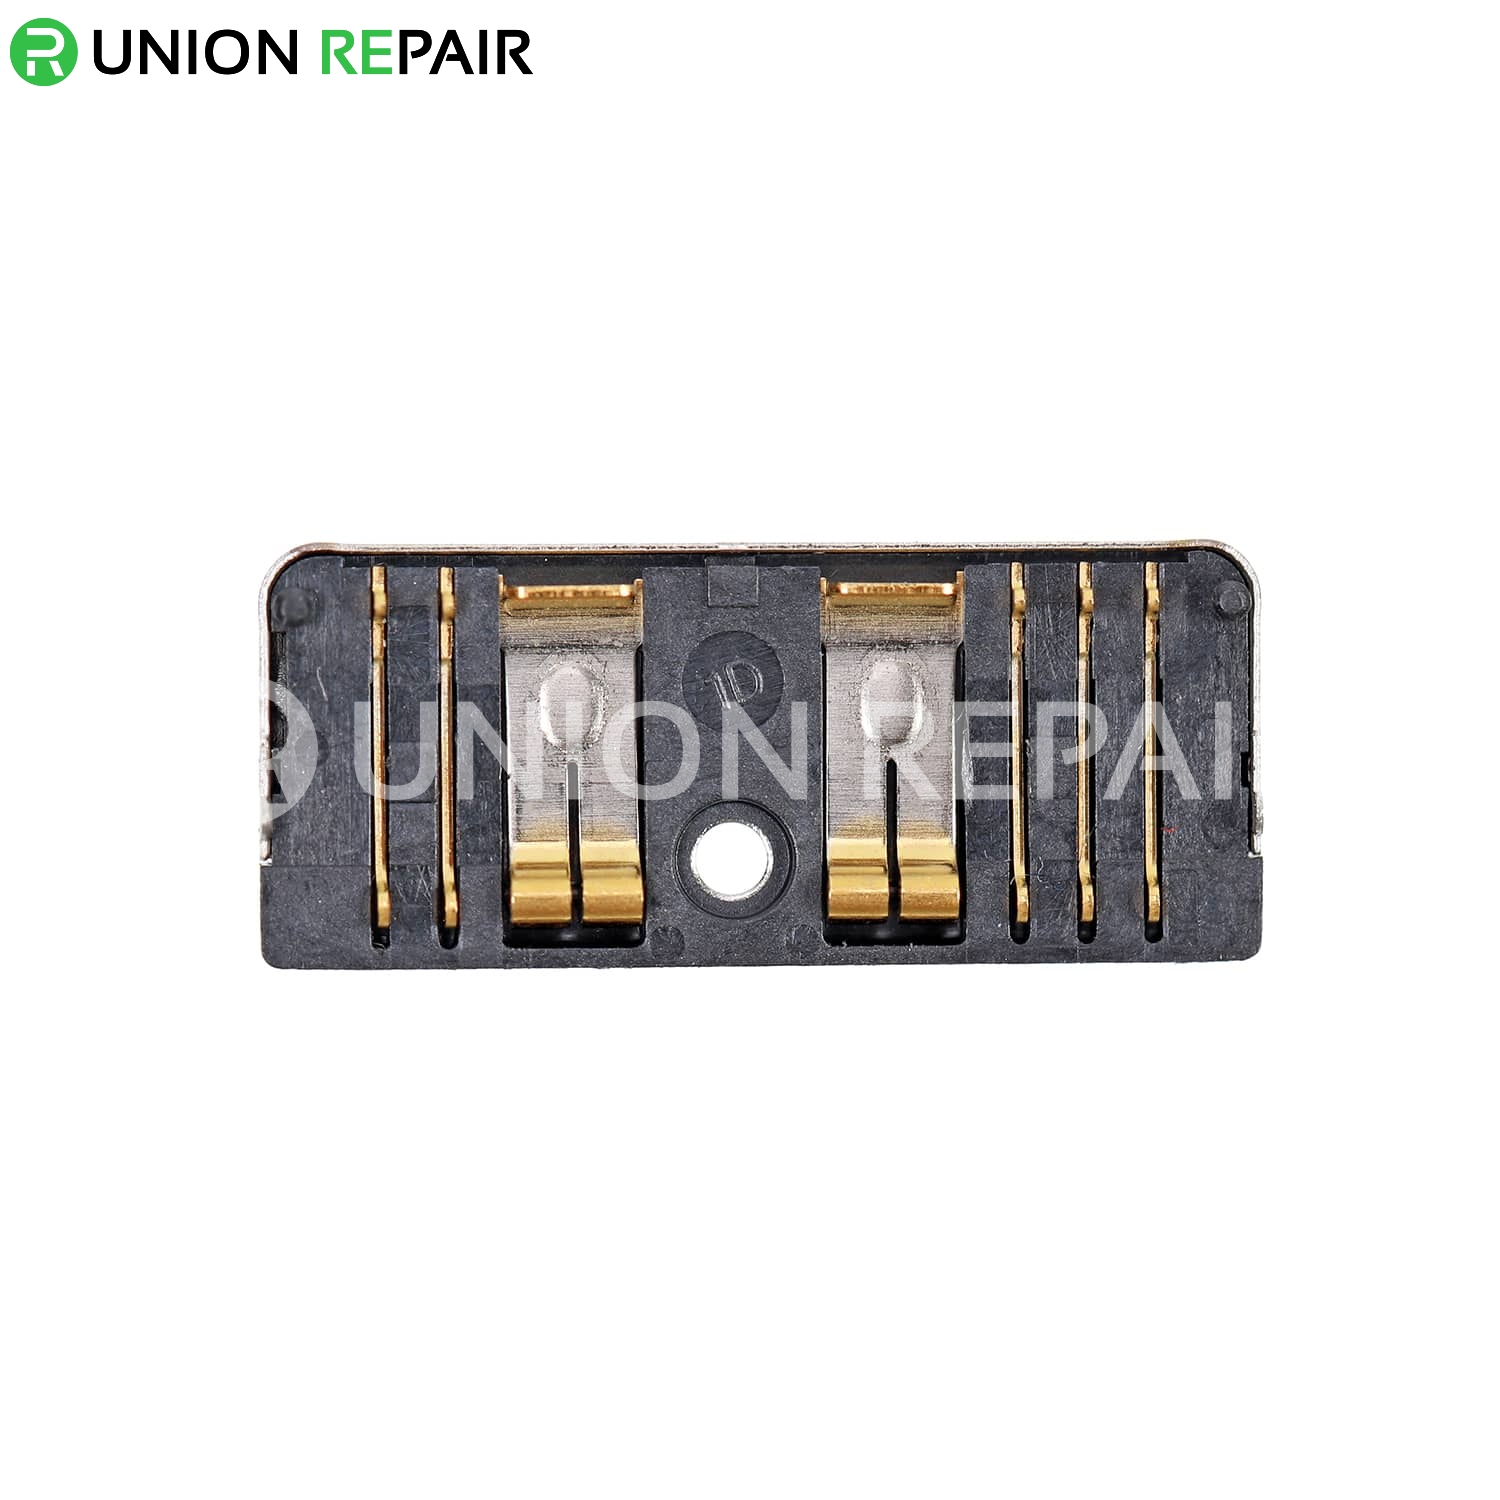 Replacement for iPad Pro 9.7 Battery Connector Port Onboard